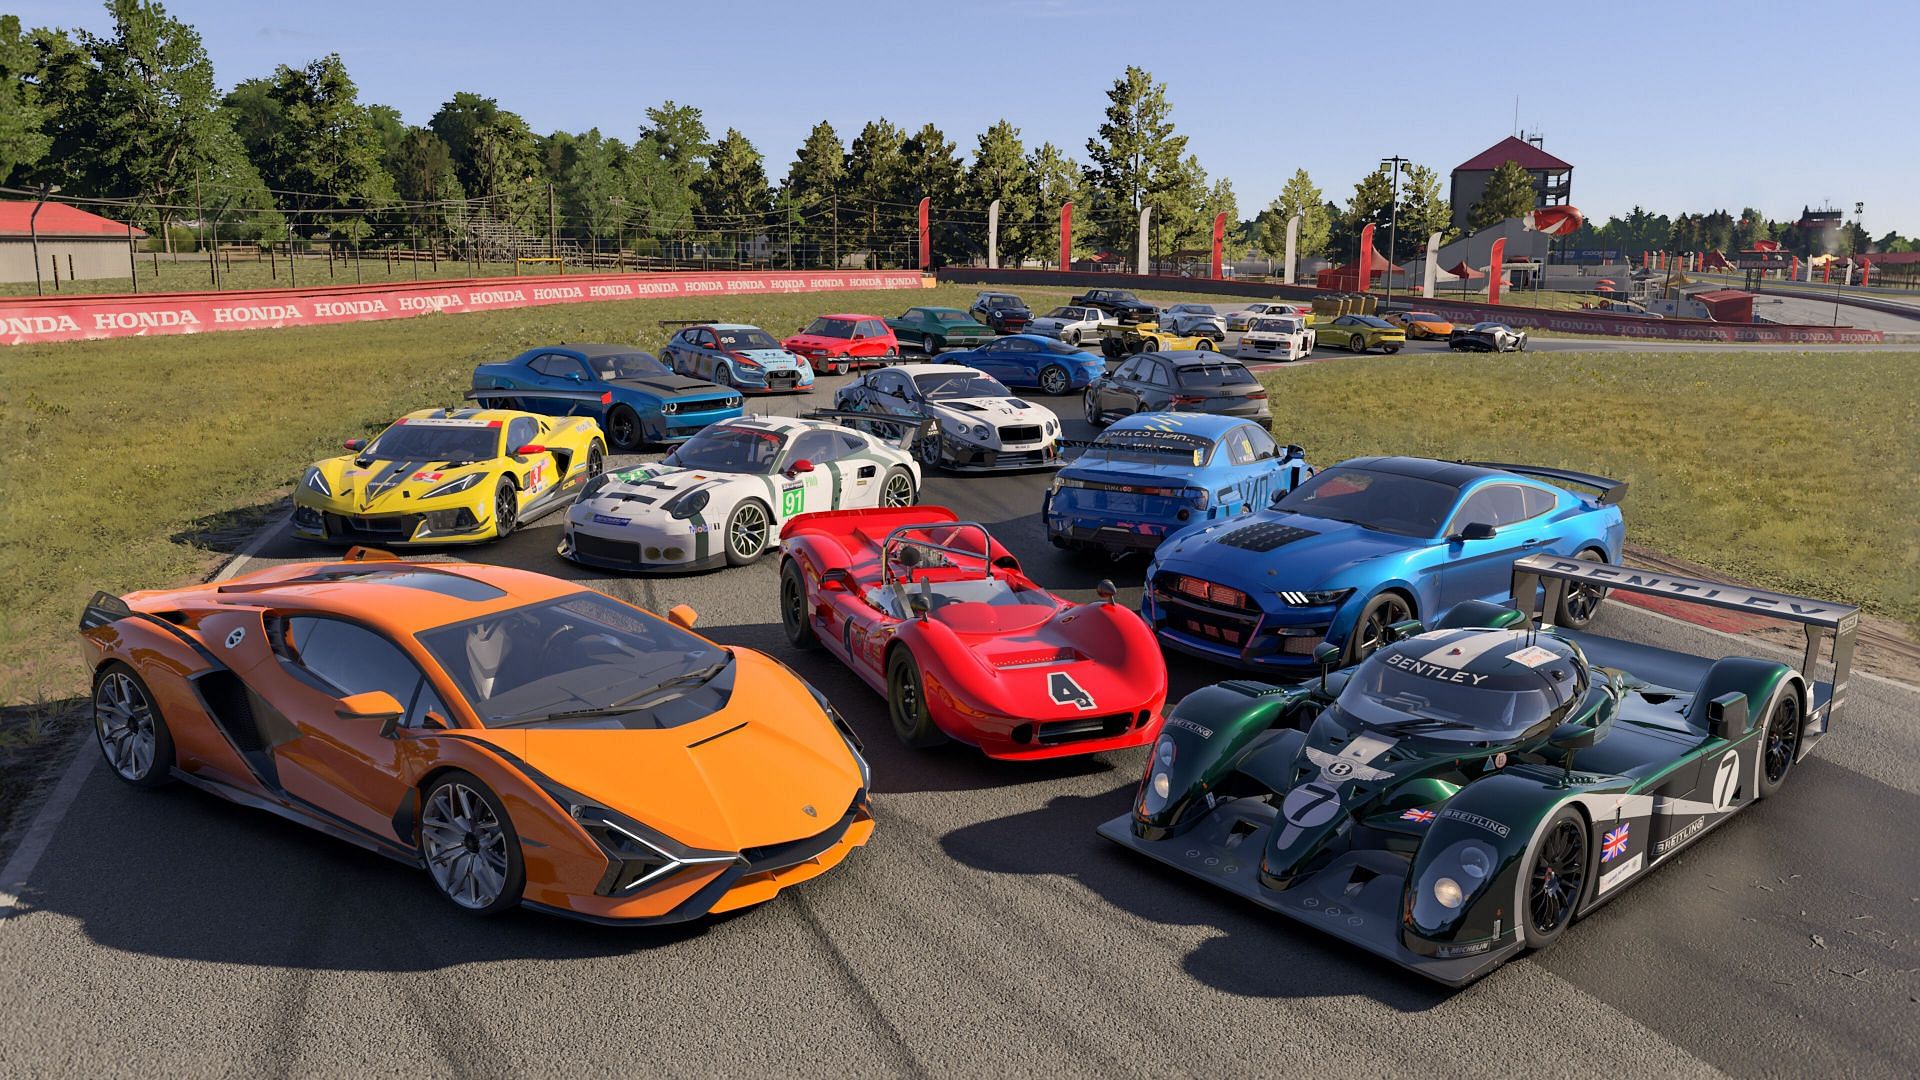 Forza Motorsport is the latest victim of review bombing on Steam - Xfire